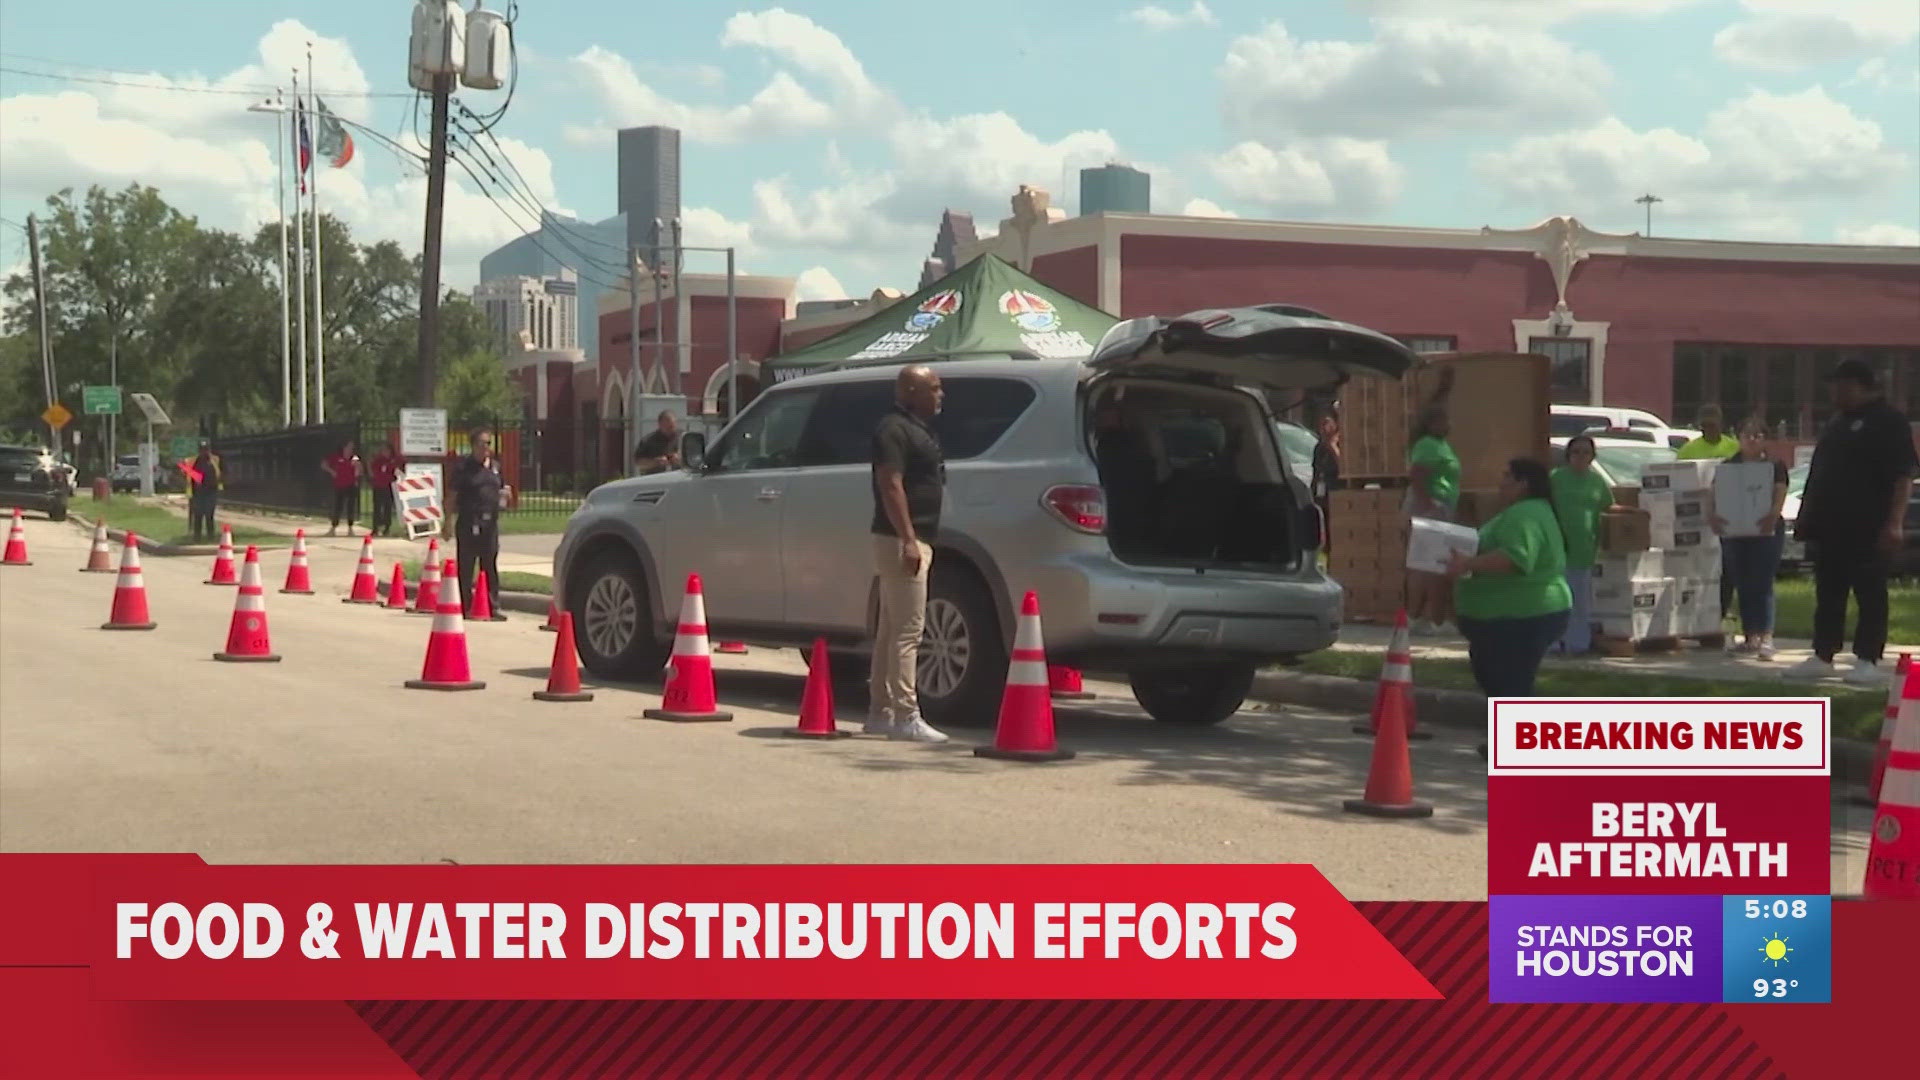 City officials are making resources available to people in need across Houston.